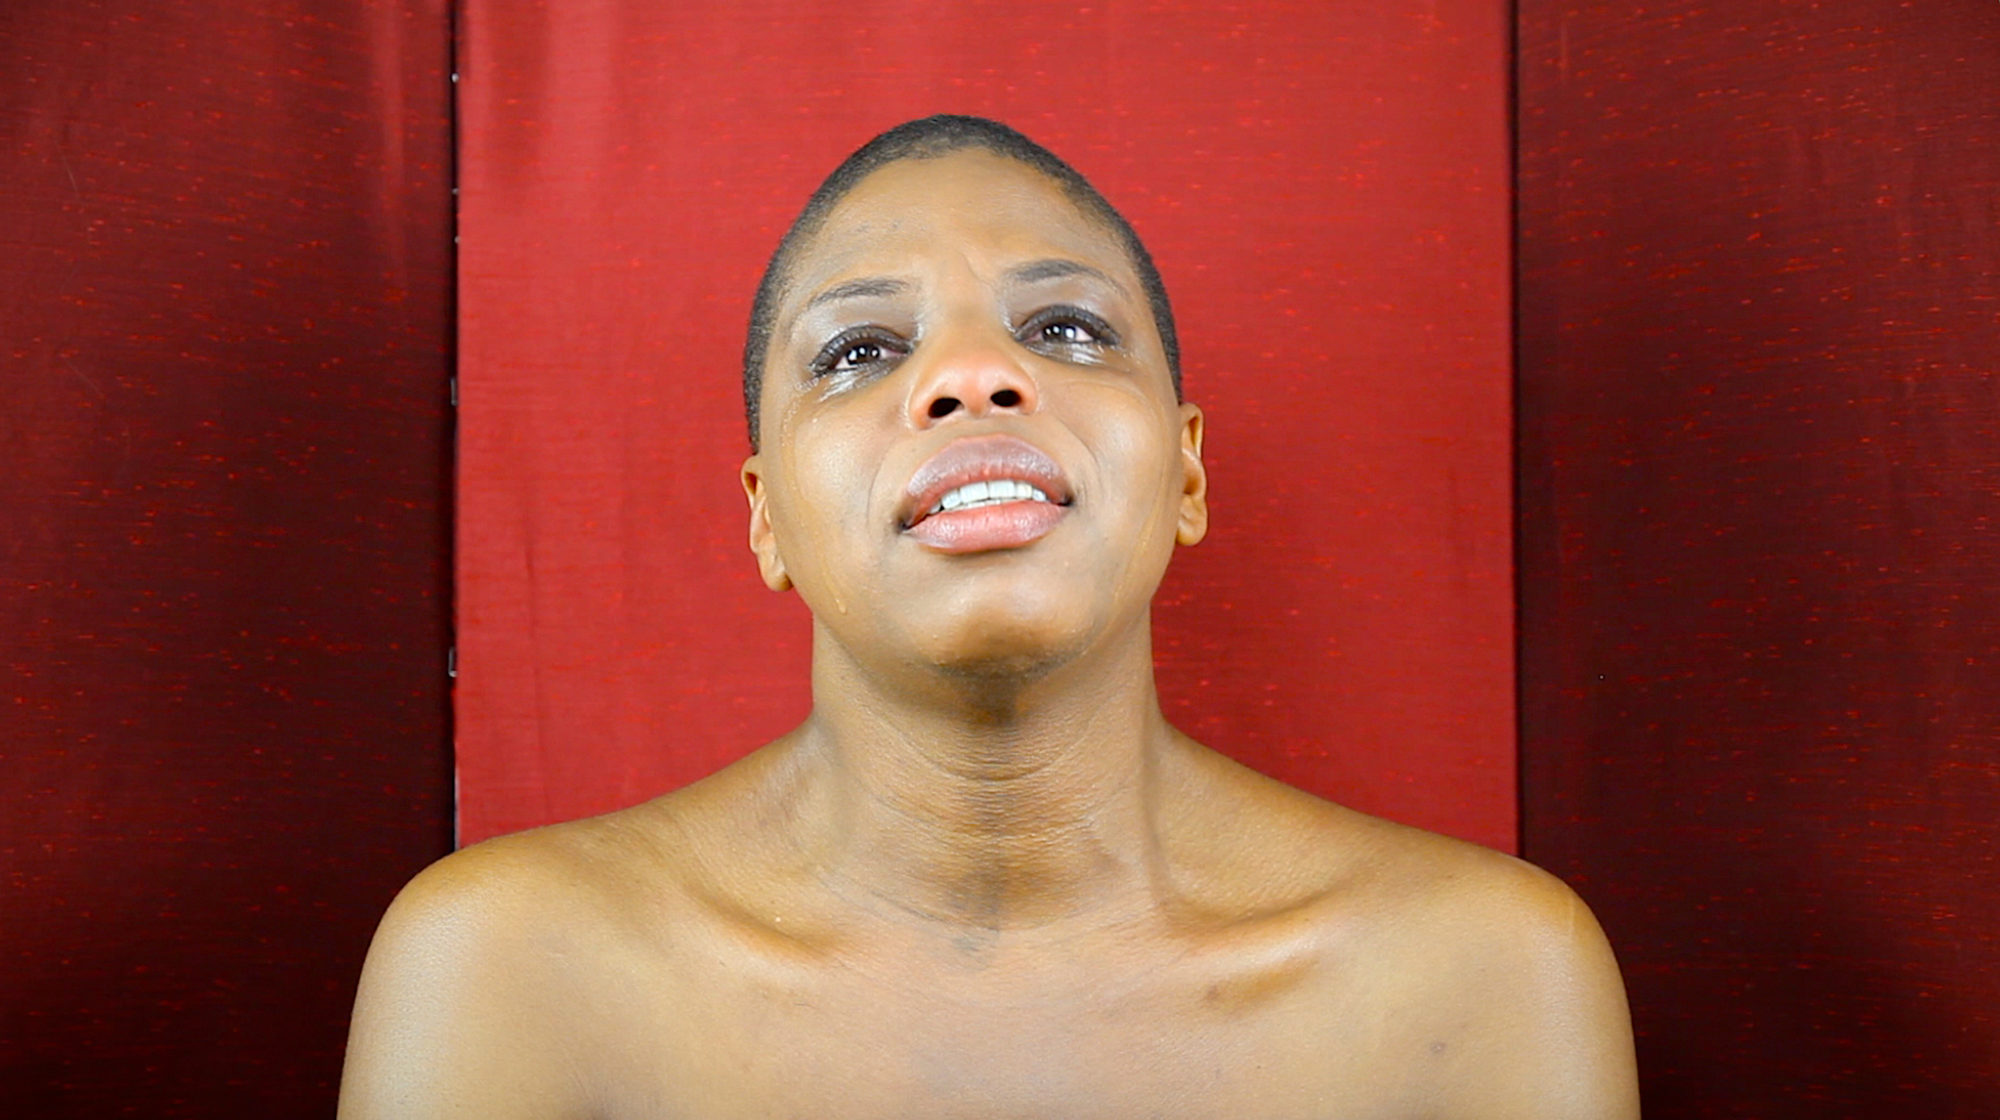 headshot of person crying in front of red backdrop